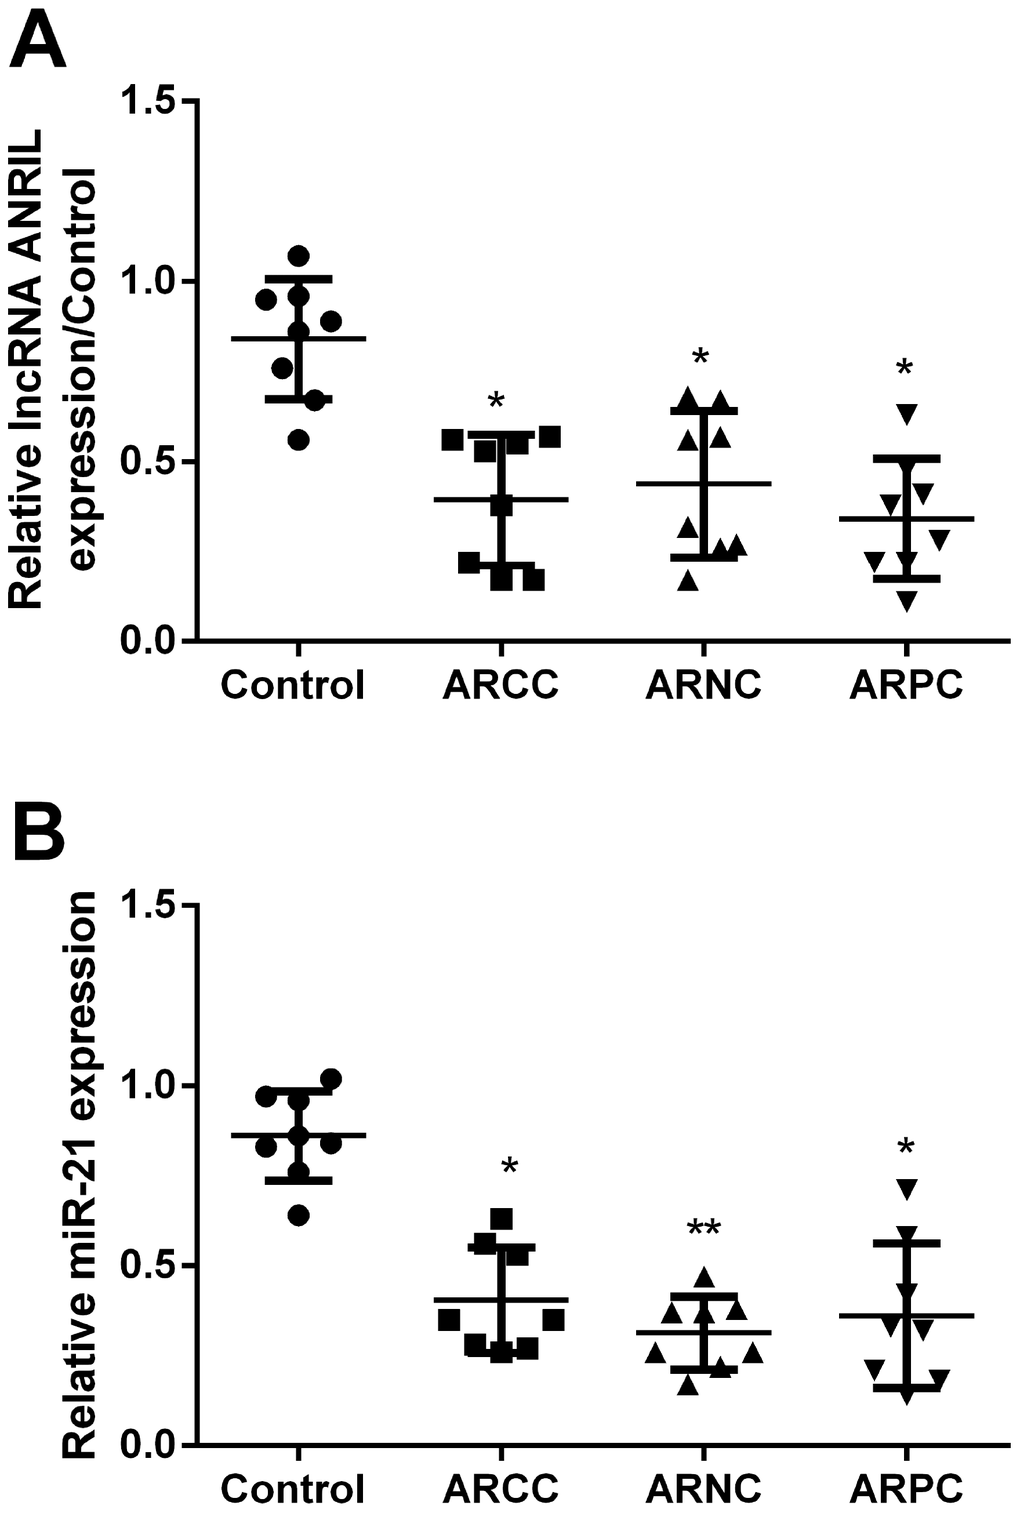 LncRNA ANRIL and miR-21 were down-regulated in cataract patient tissues. The expression of (A) lncRNA ANRIL and (B) miR-21 were detected by RT-qPCR. *, P P 